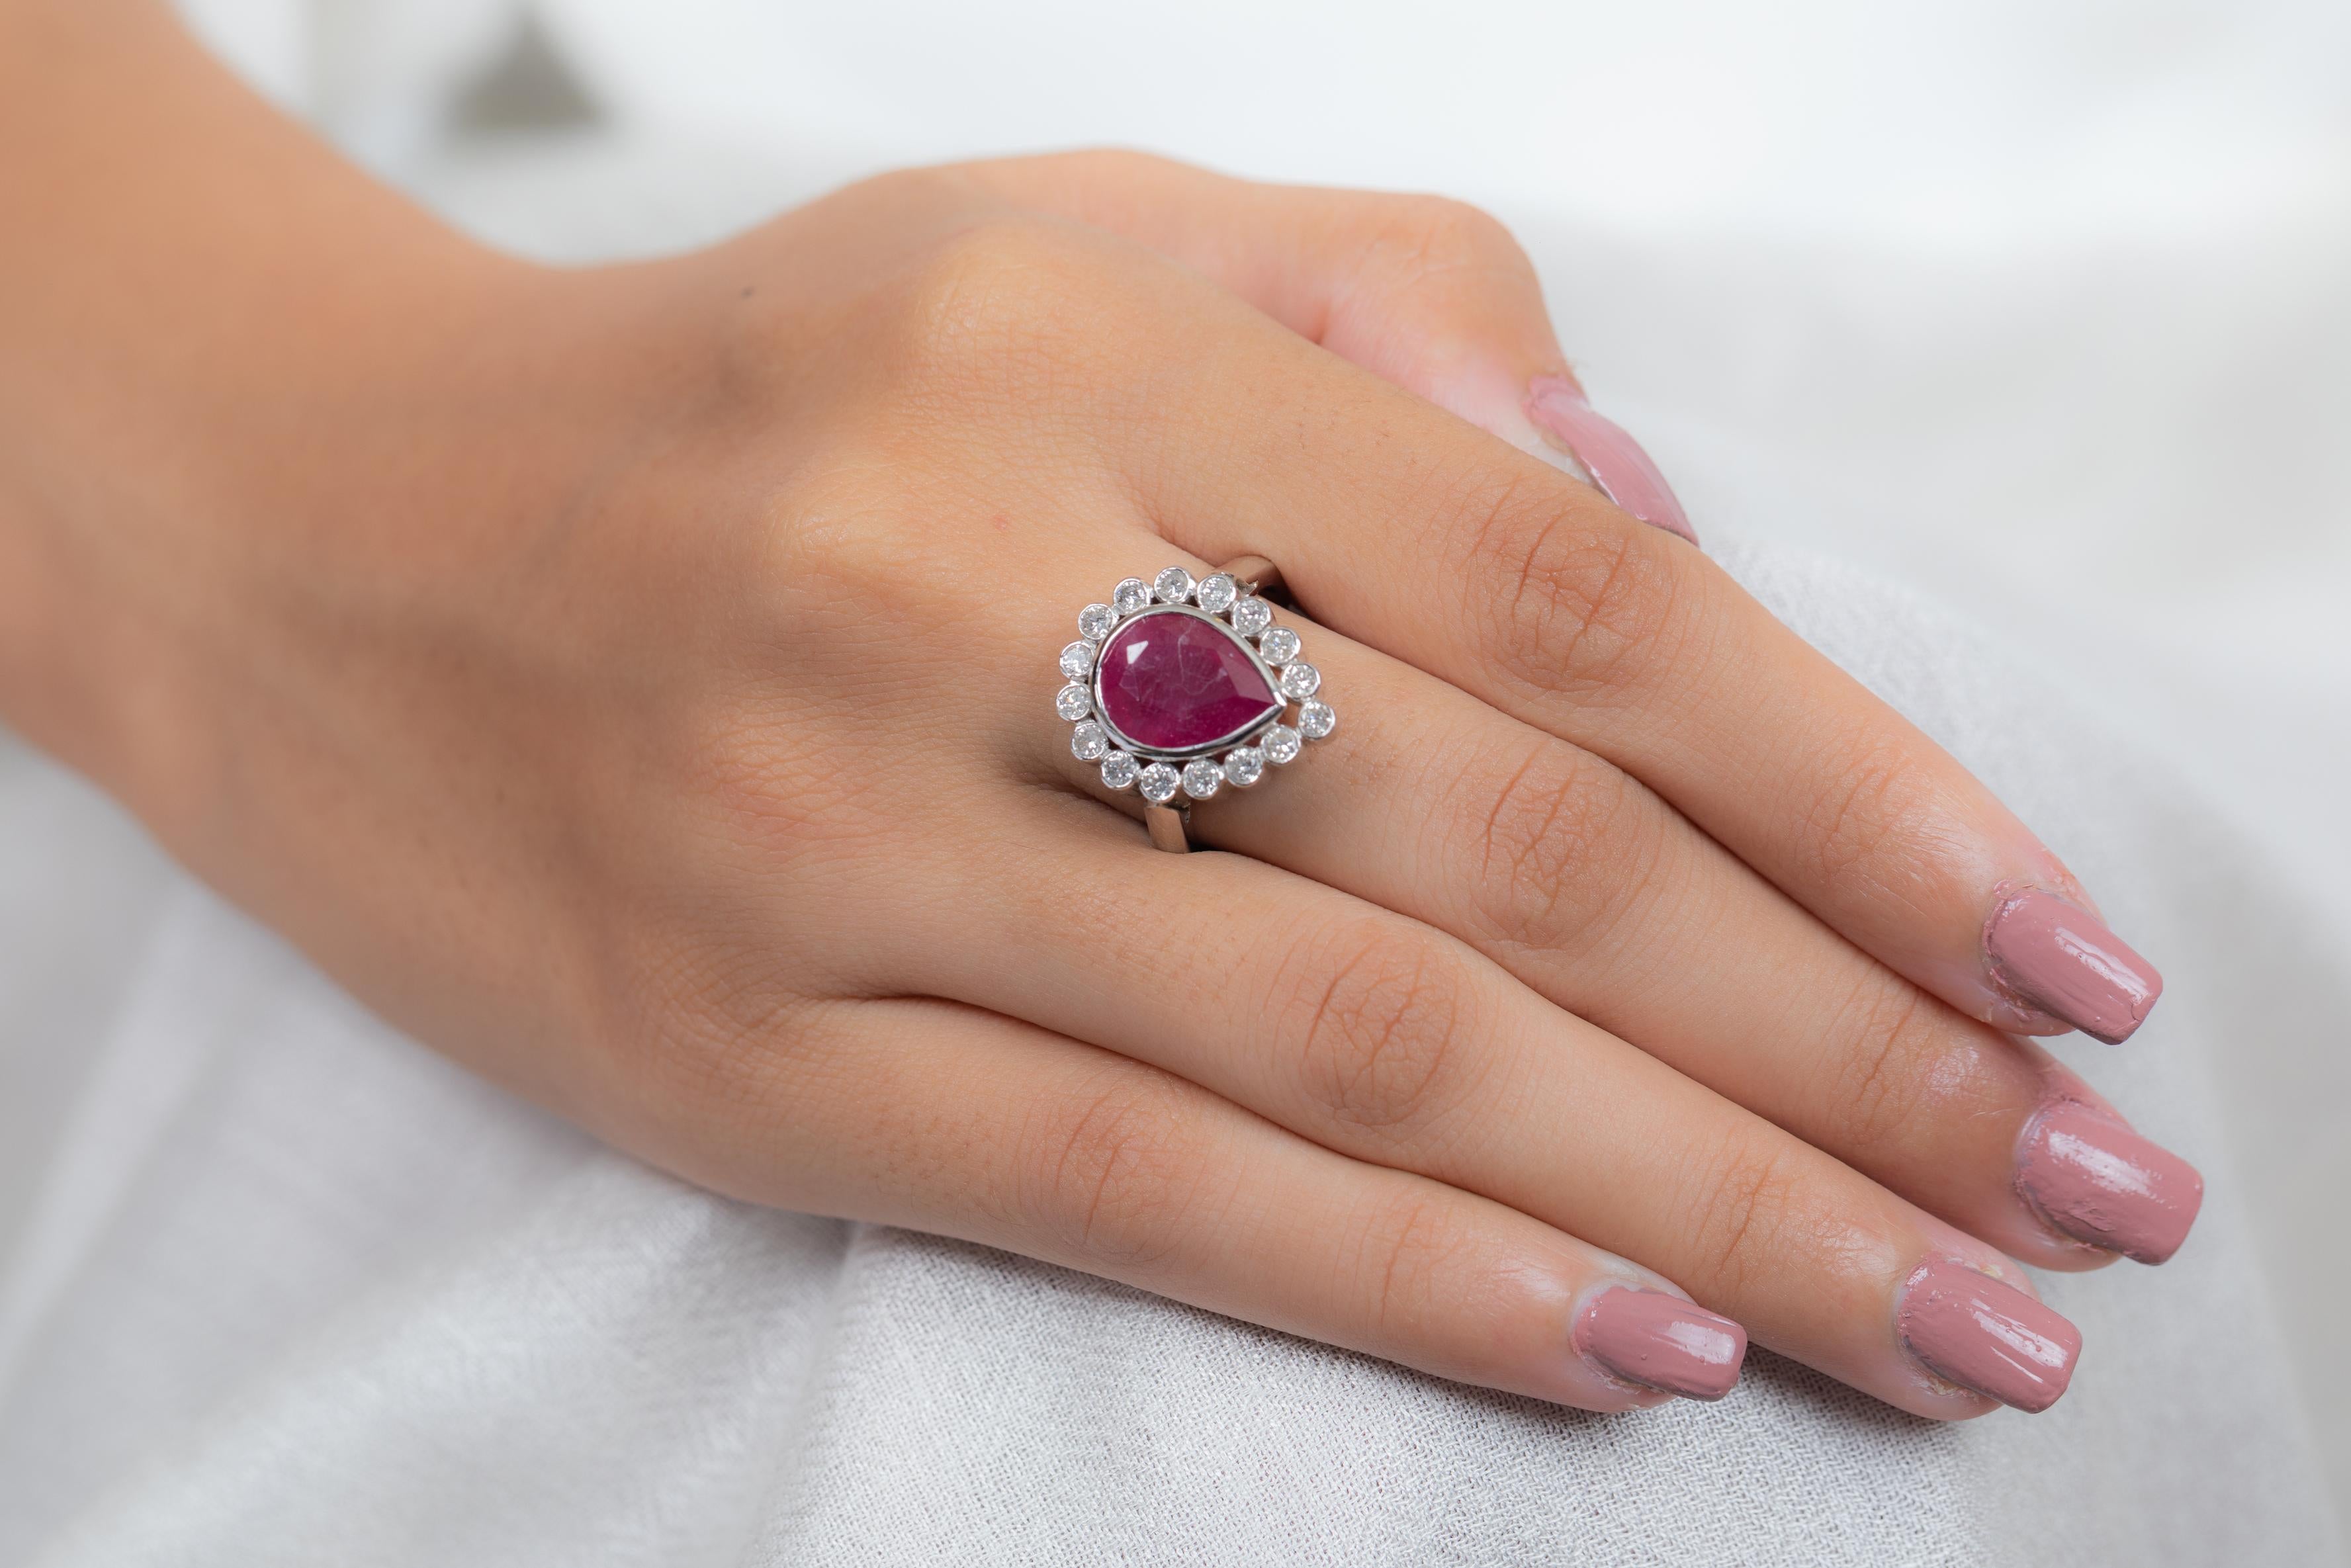 For Sale:  18K White Gold Pear Cut Ruby Cocktail Ring with Diamonds 7